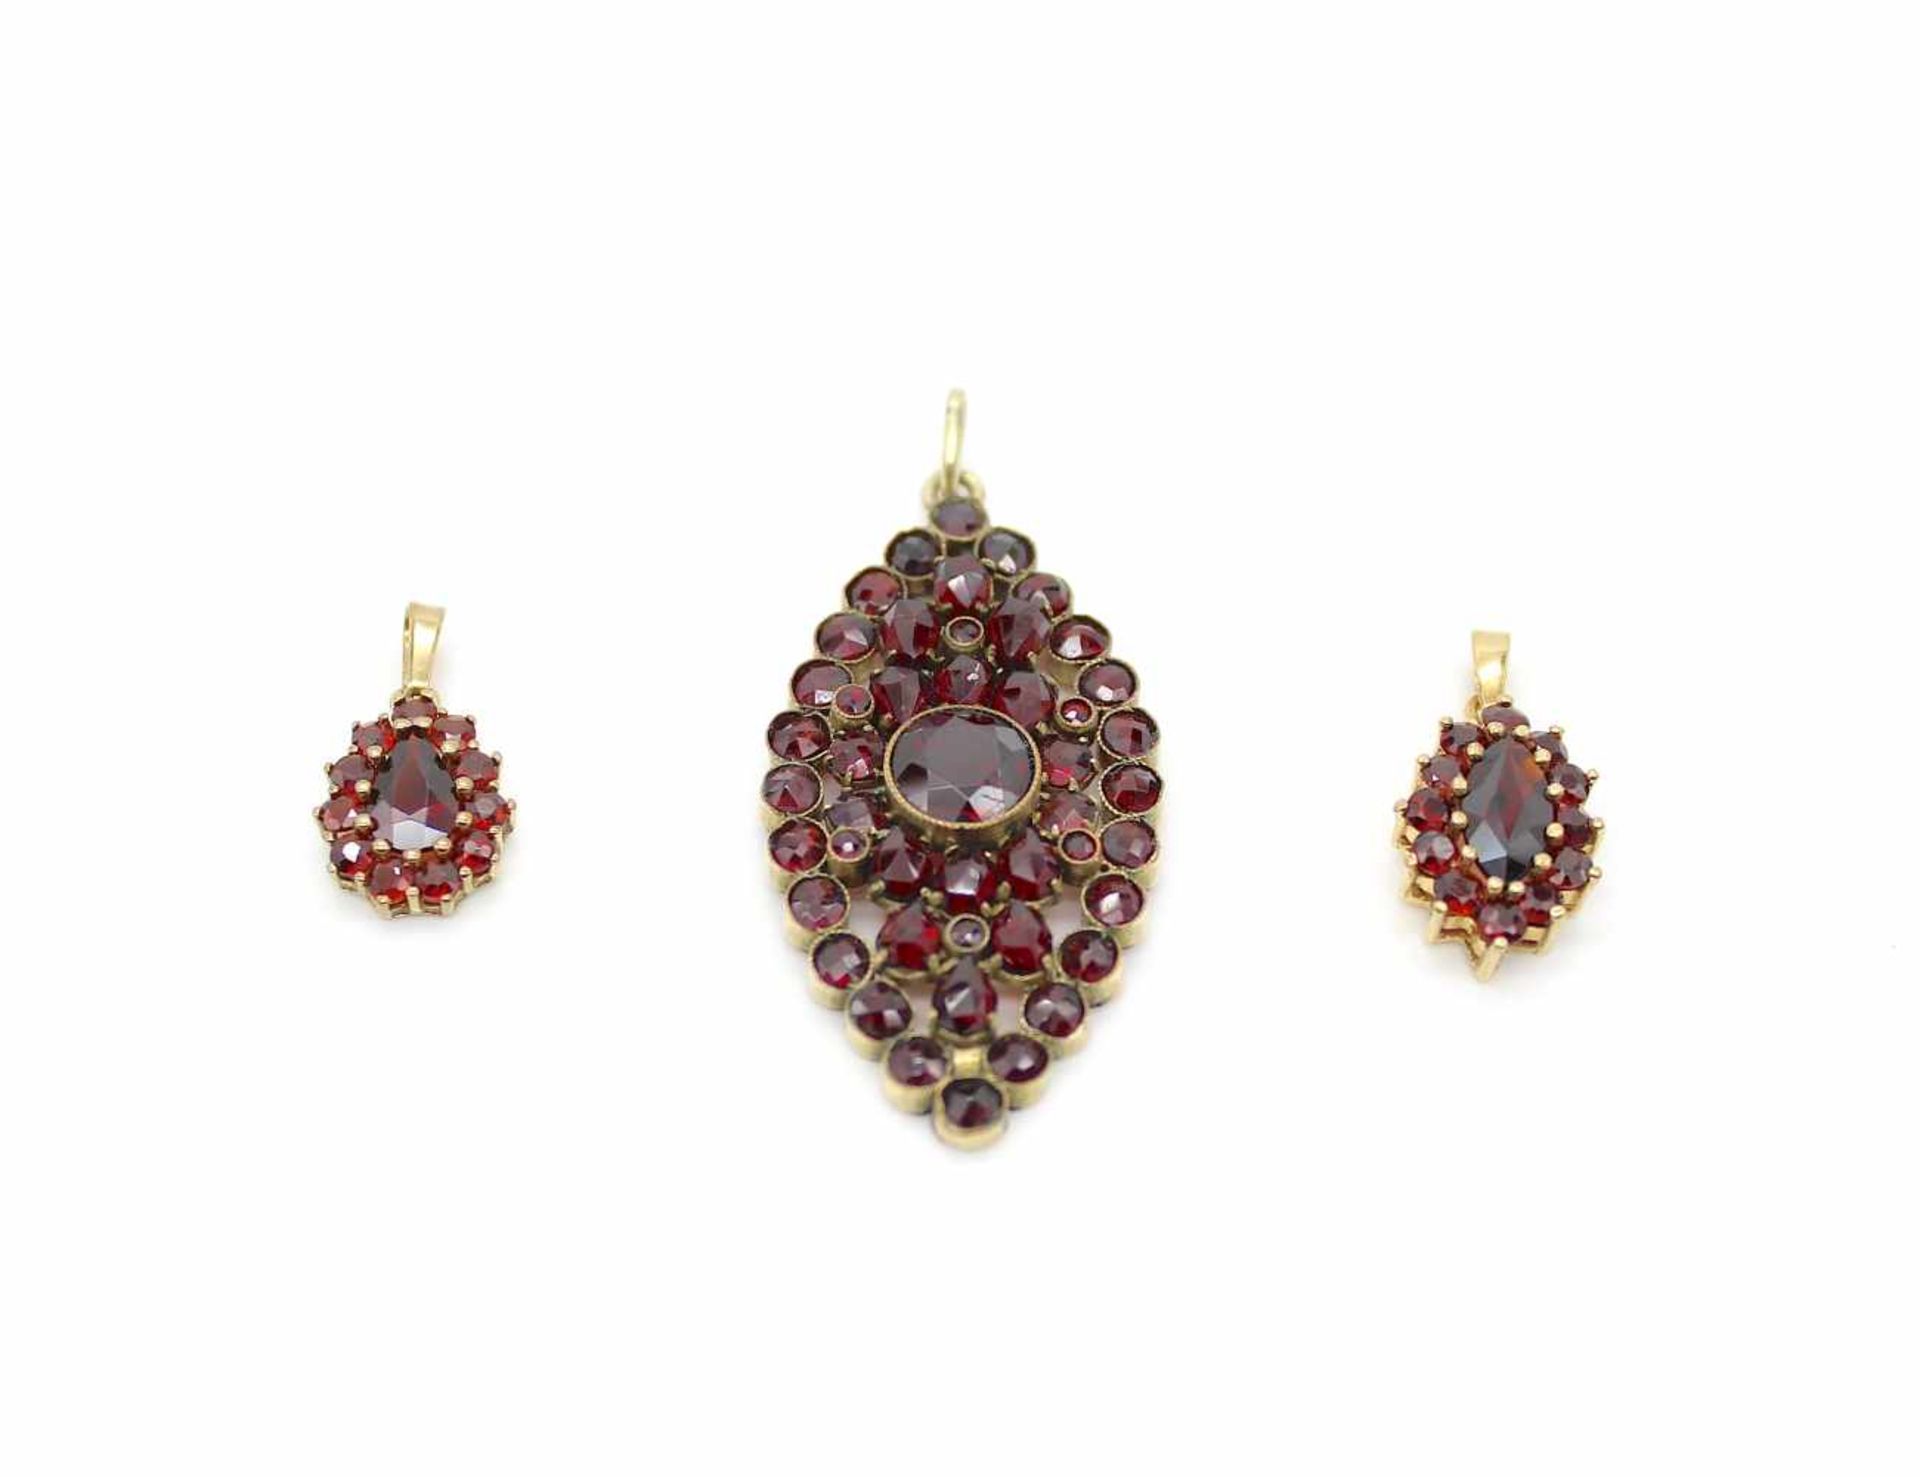 2 pendants with 333 gold garnets, Dimensions: 11.3 x 16.3 mm and 10.6 x 14.1 mm, weight 3 g,1